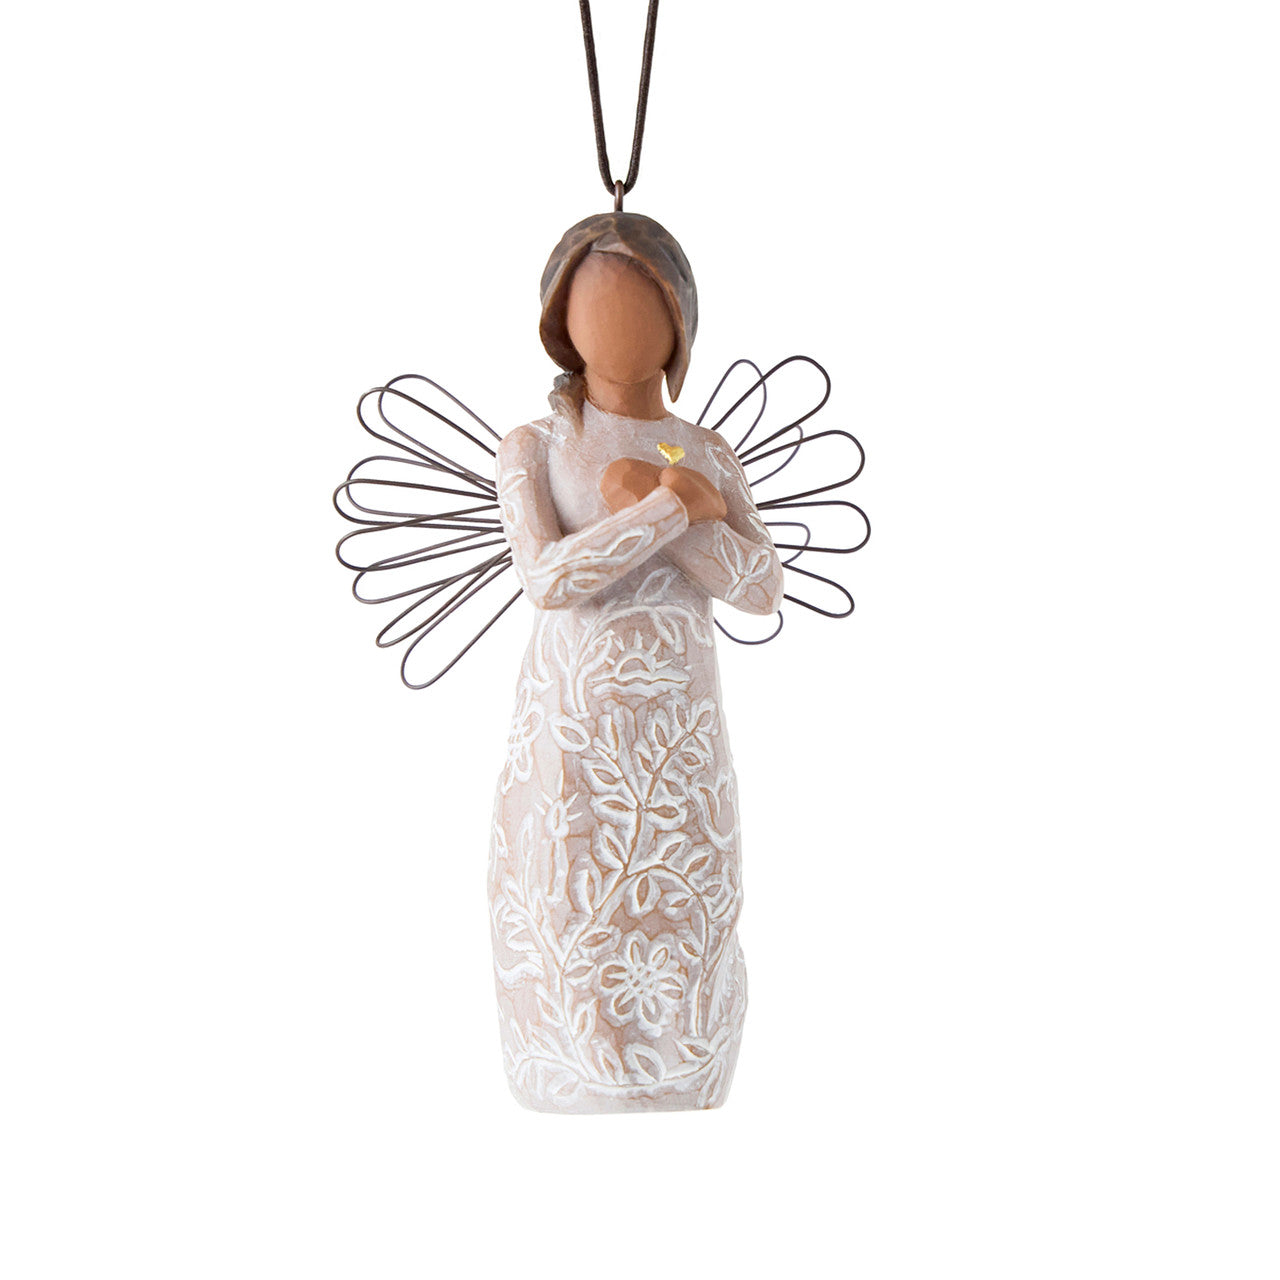 Remembrance Hanging Ornament (Darker skin and hair)